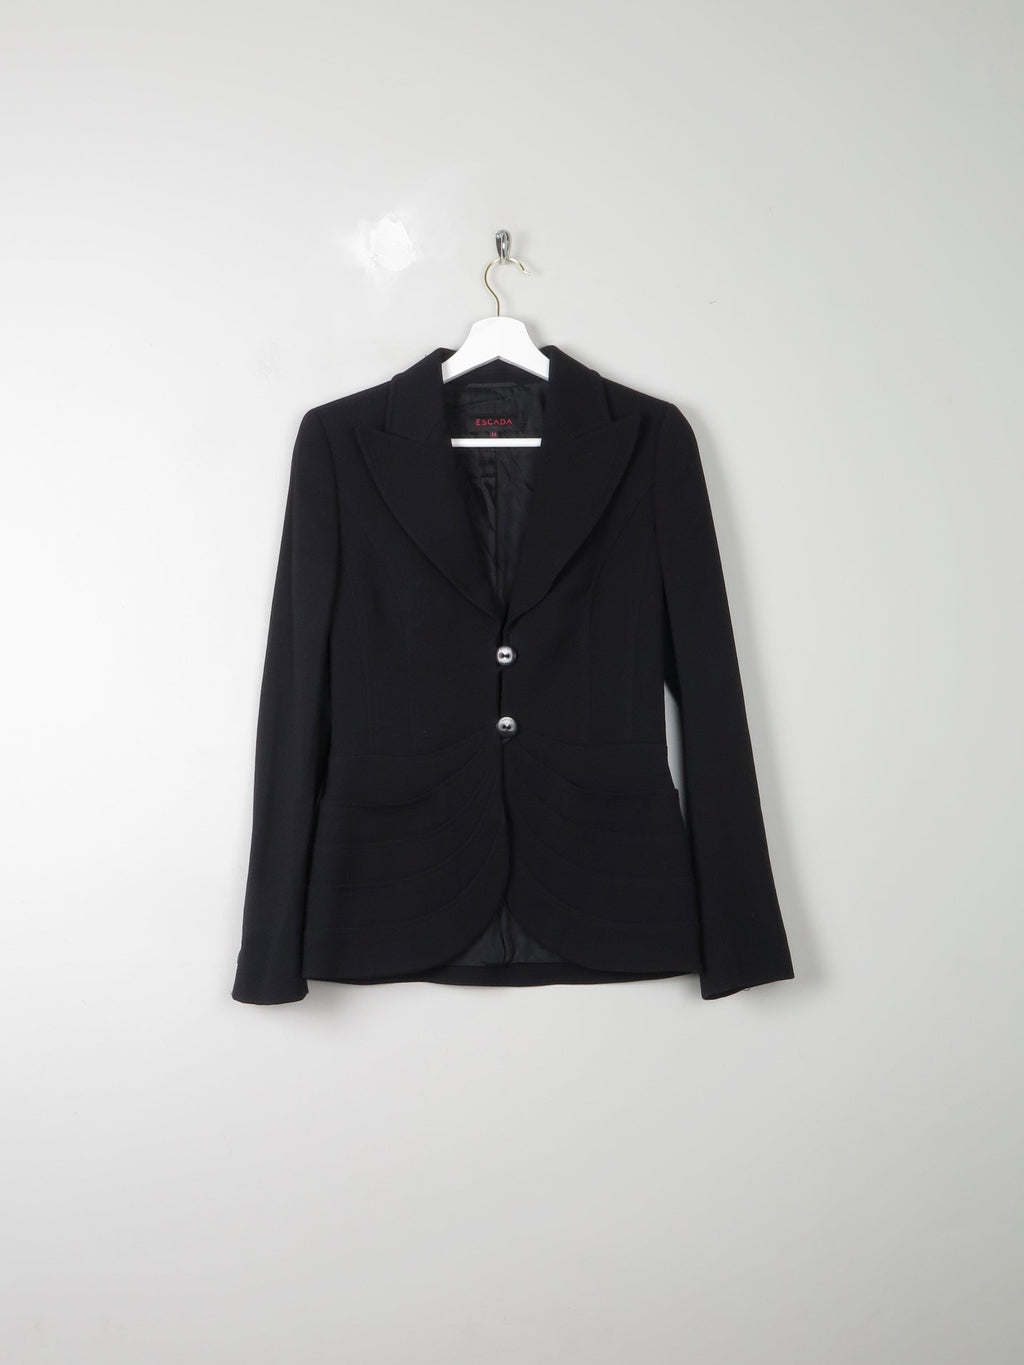 Women's Escada Vintage Black Fitted Jacket XS 6/8 - The Harlequin